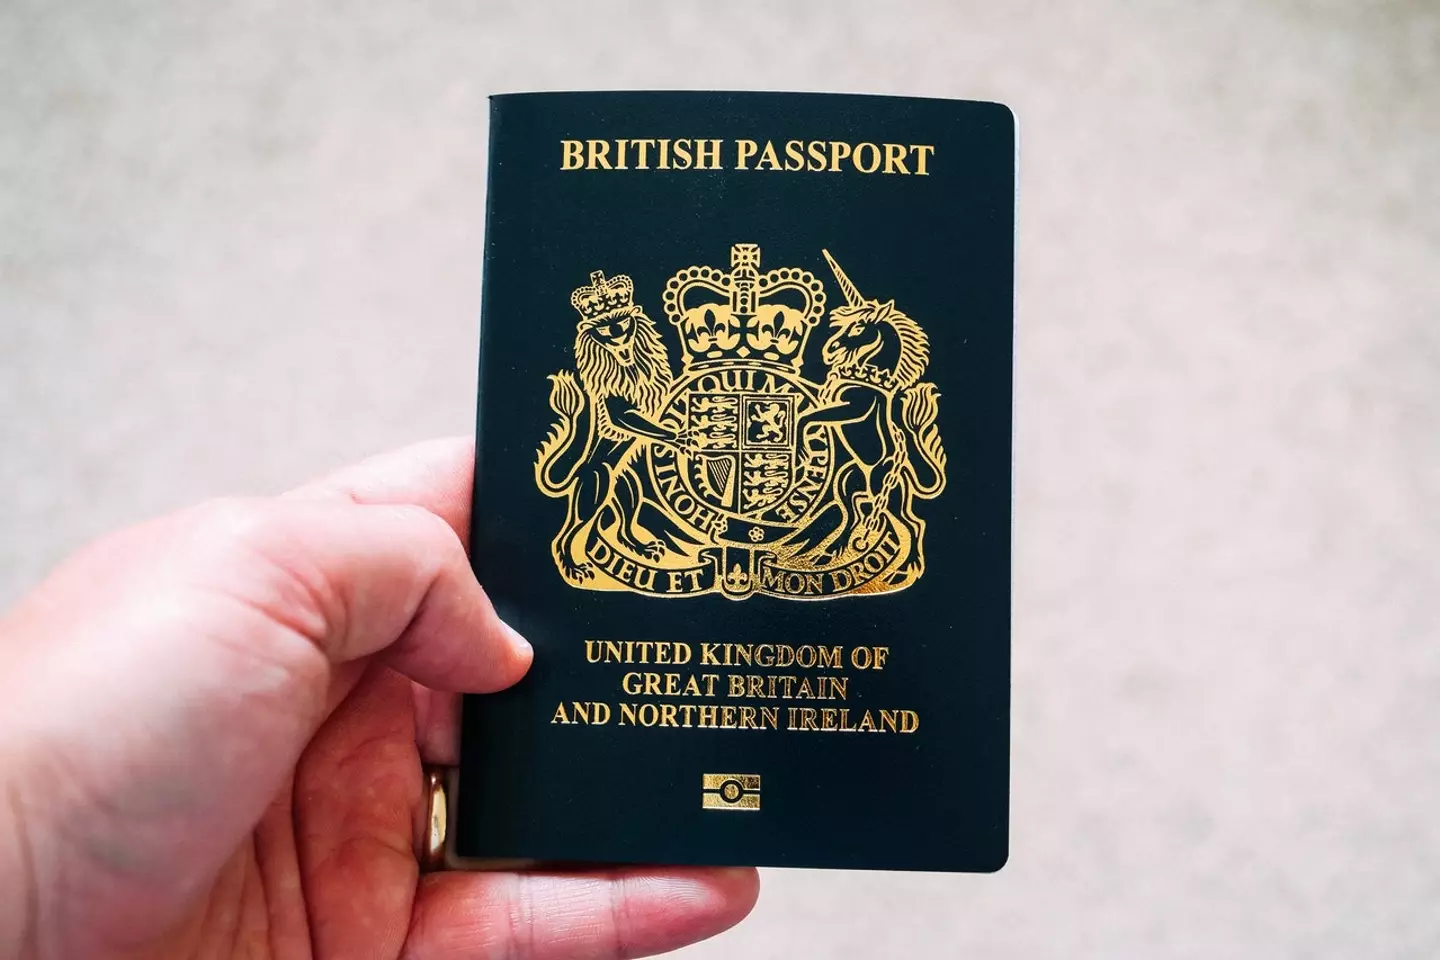 People who are recreational users of illegal drugs could lose their passport due to the potential introduction of new laws.